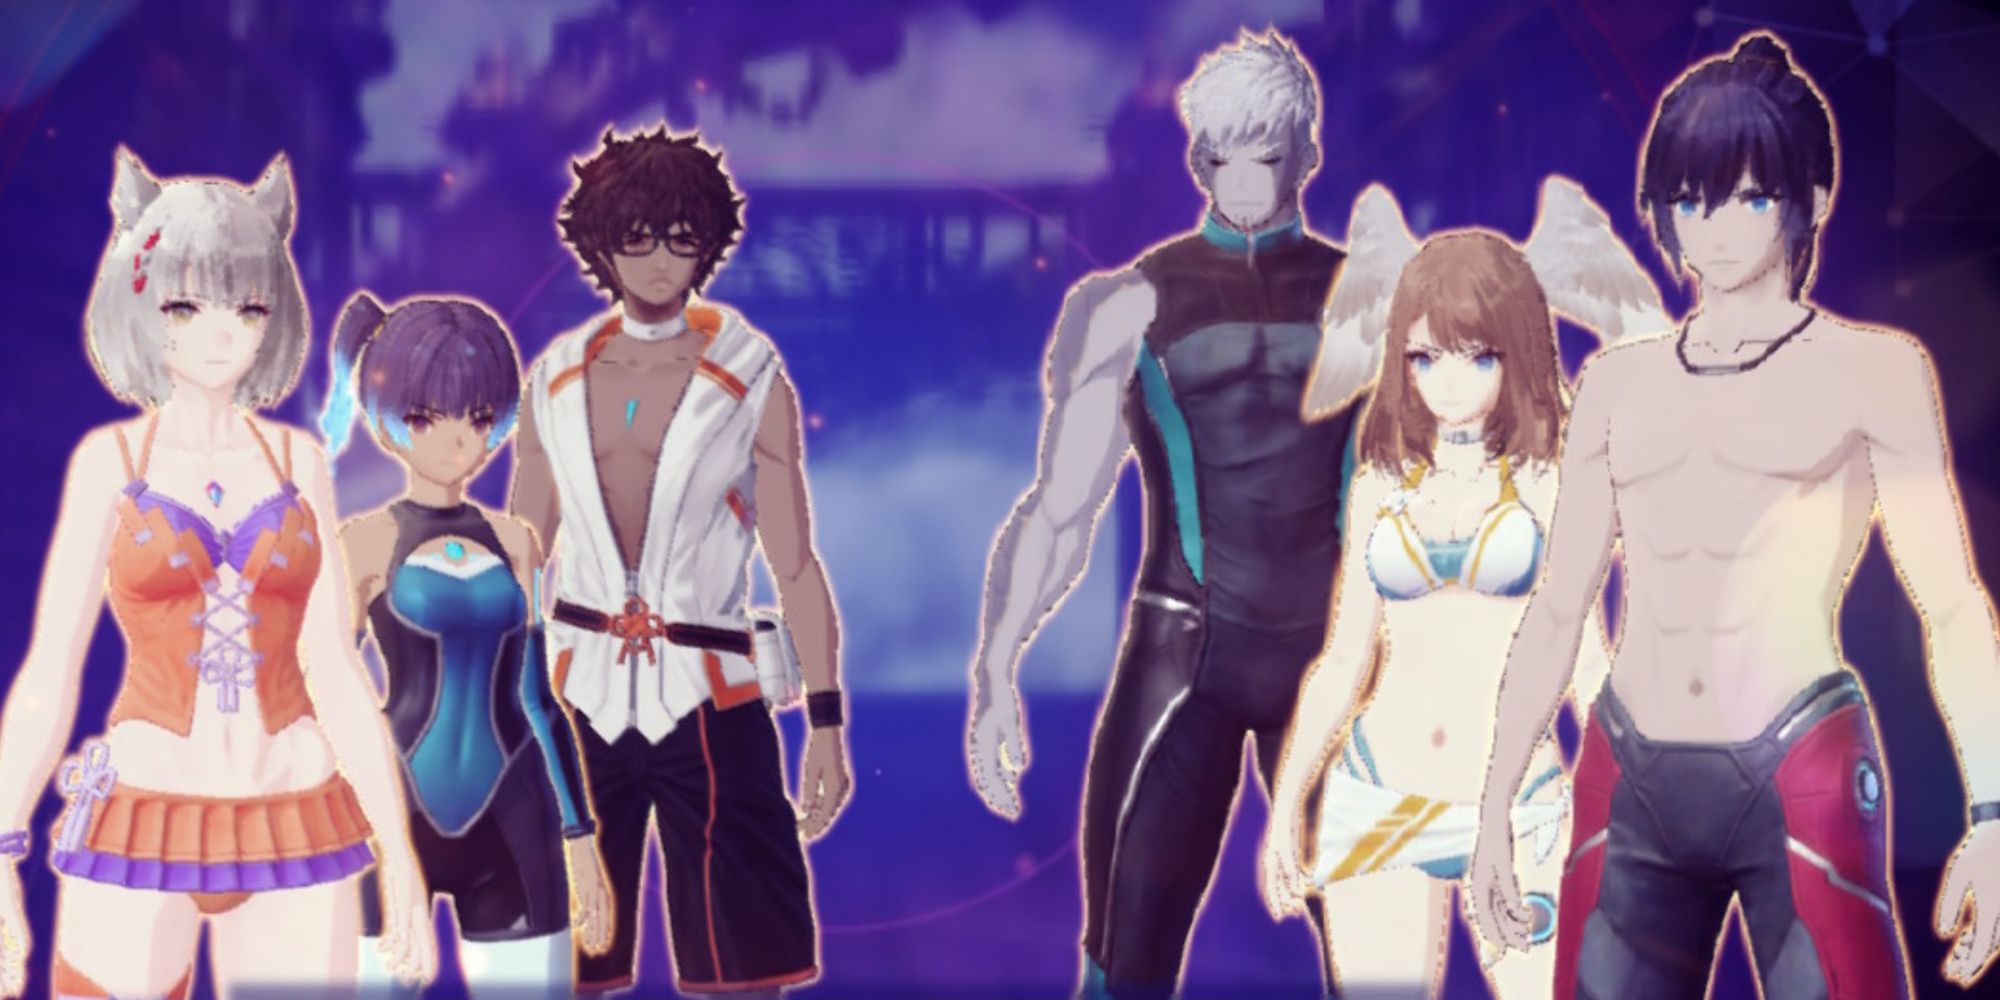 The Swimwear Outfits in Xenoblade Chronicles 3